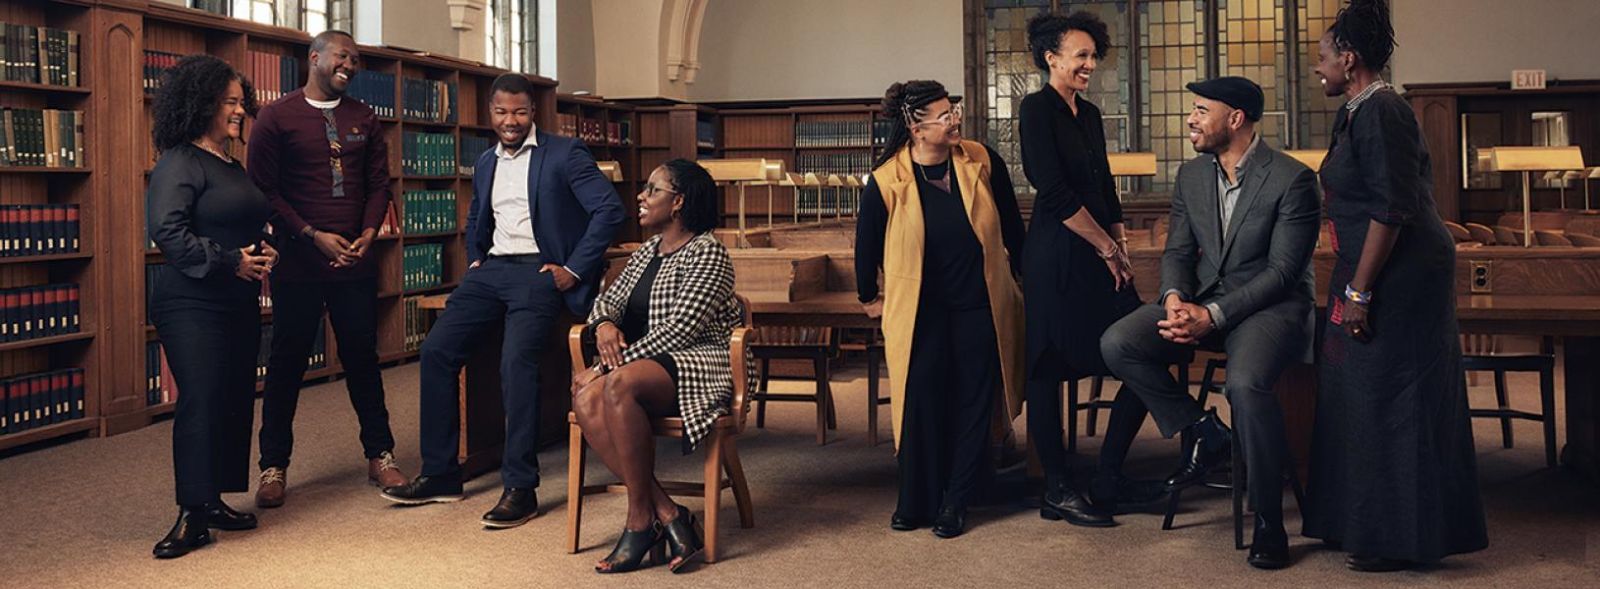 Black Studies professors pose in a library